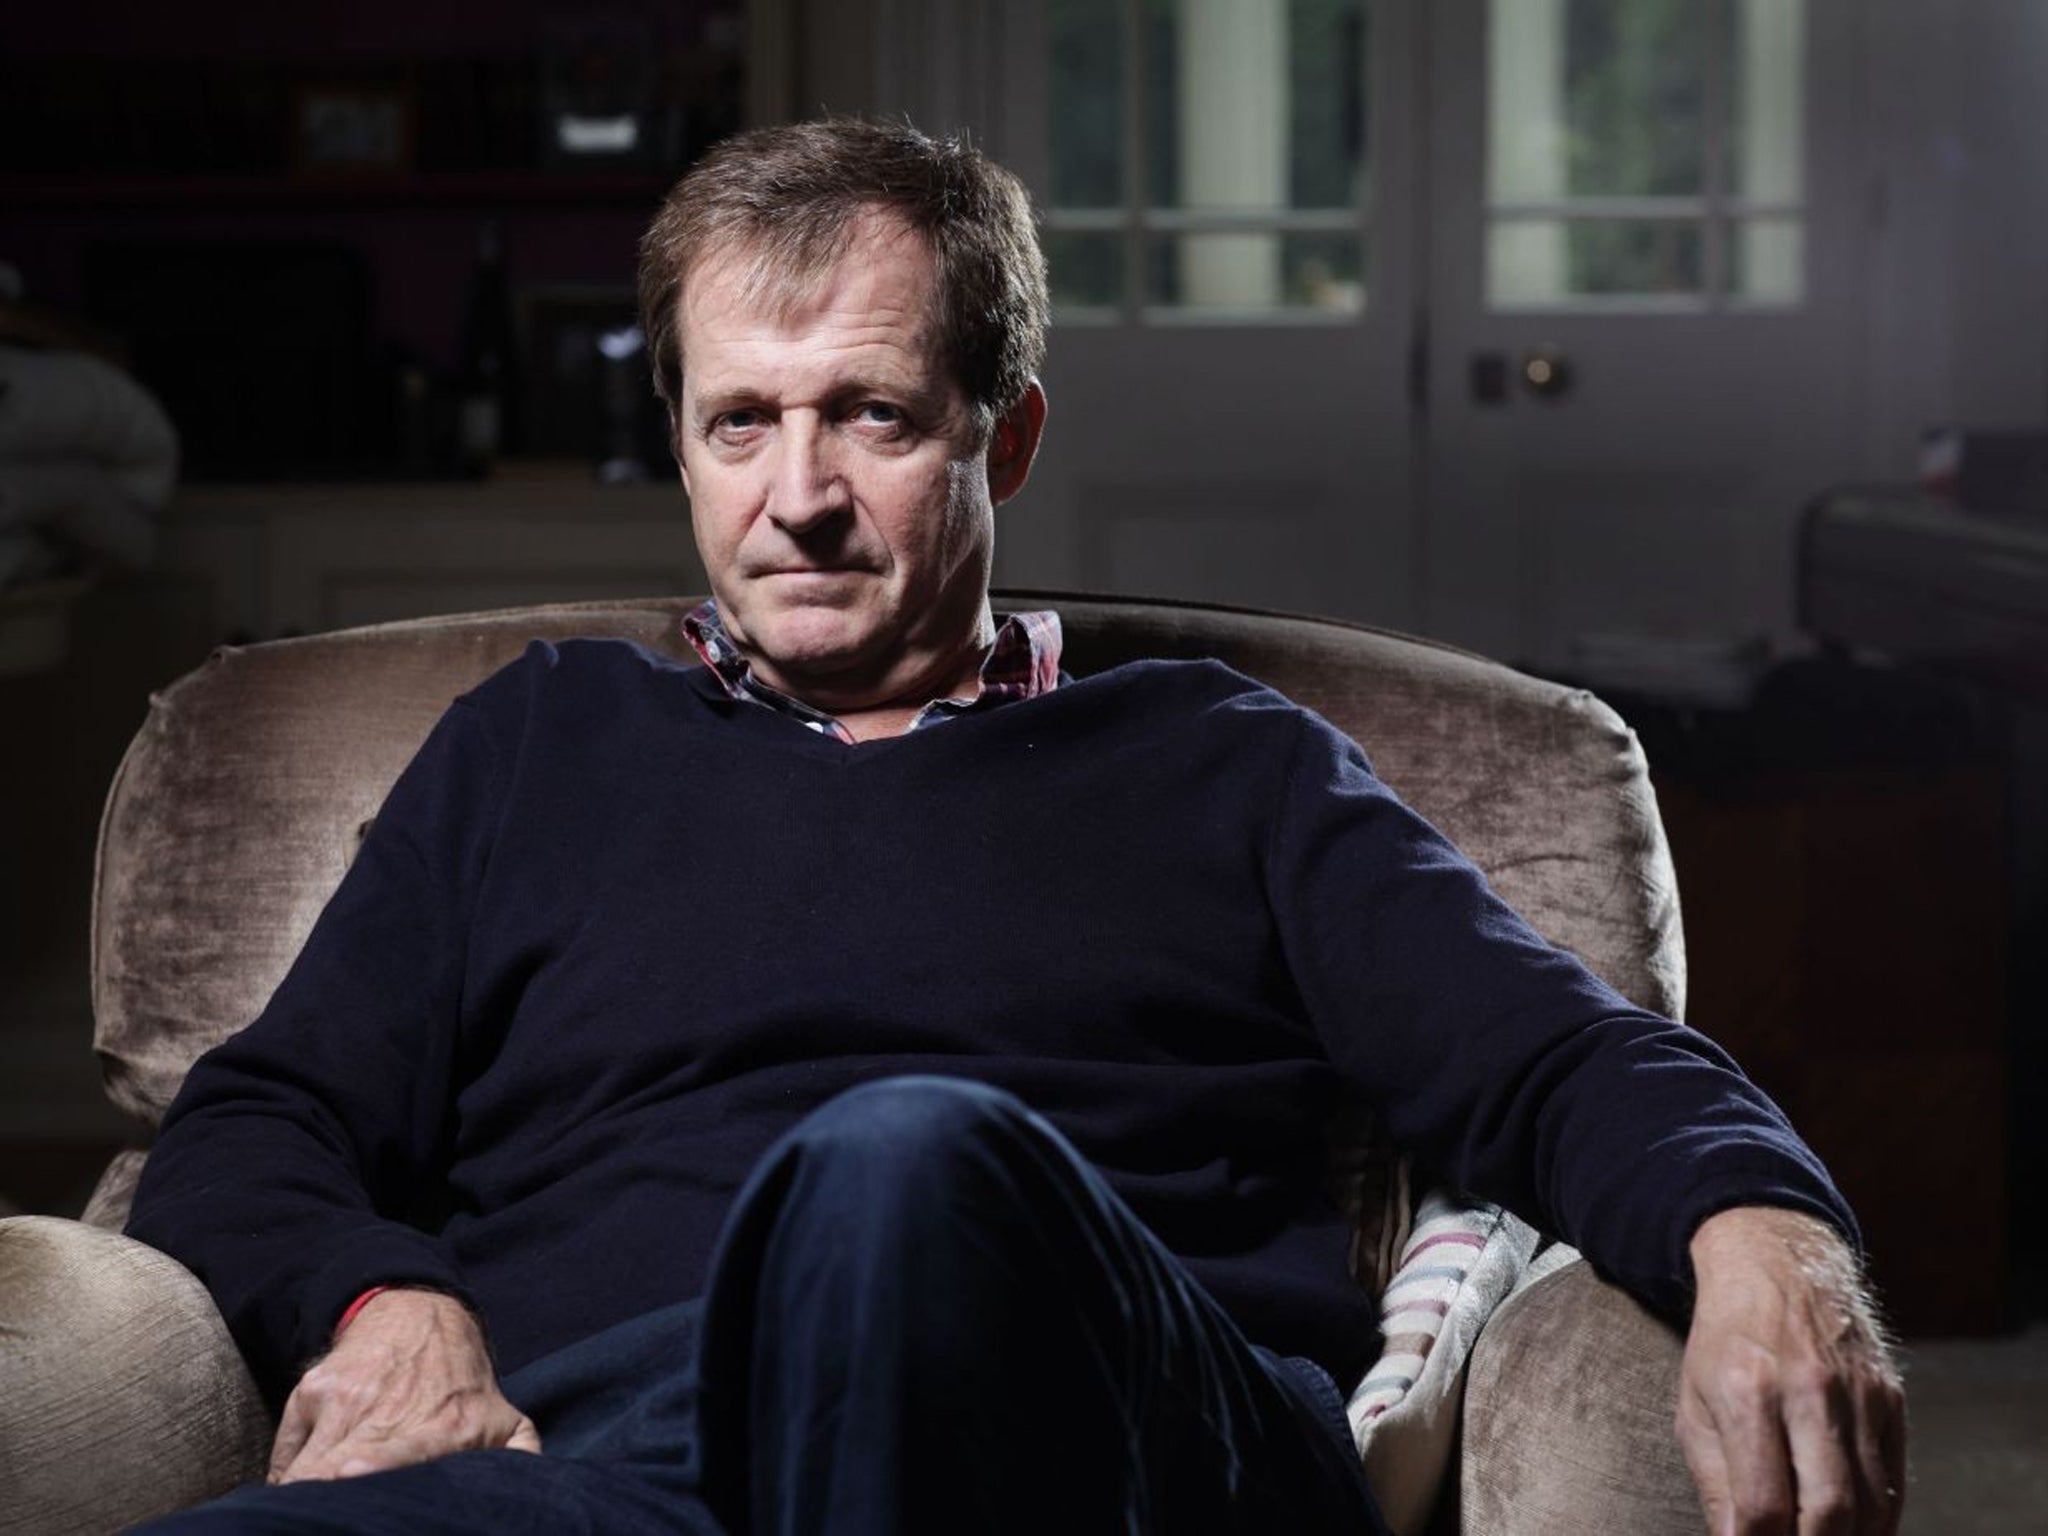 Alastair Campbell photographed at his north London home